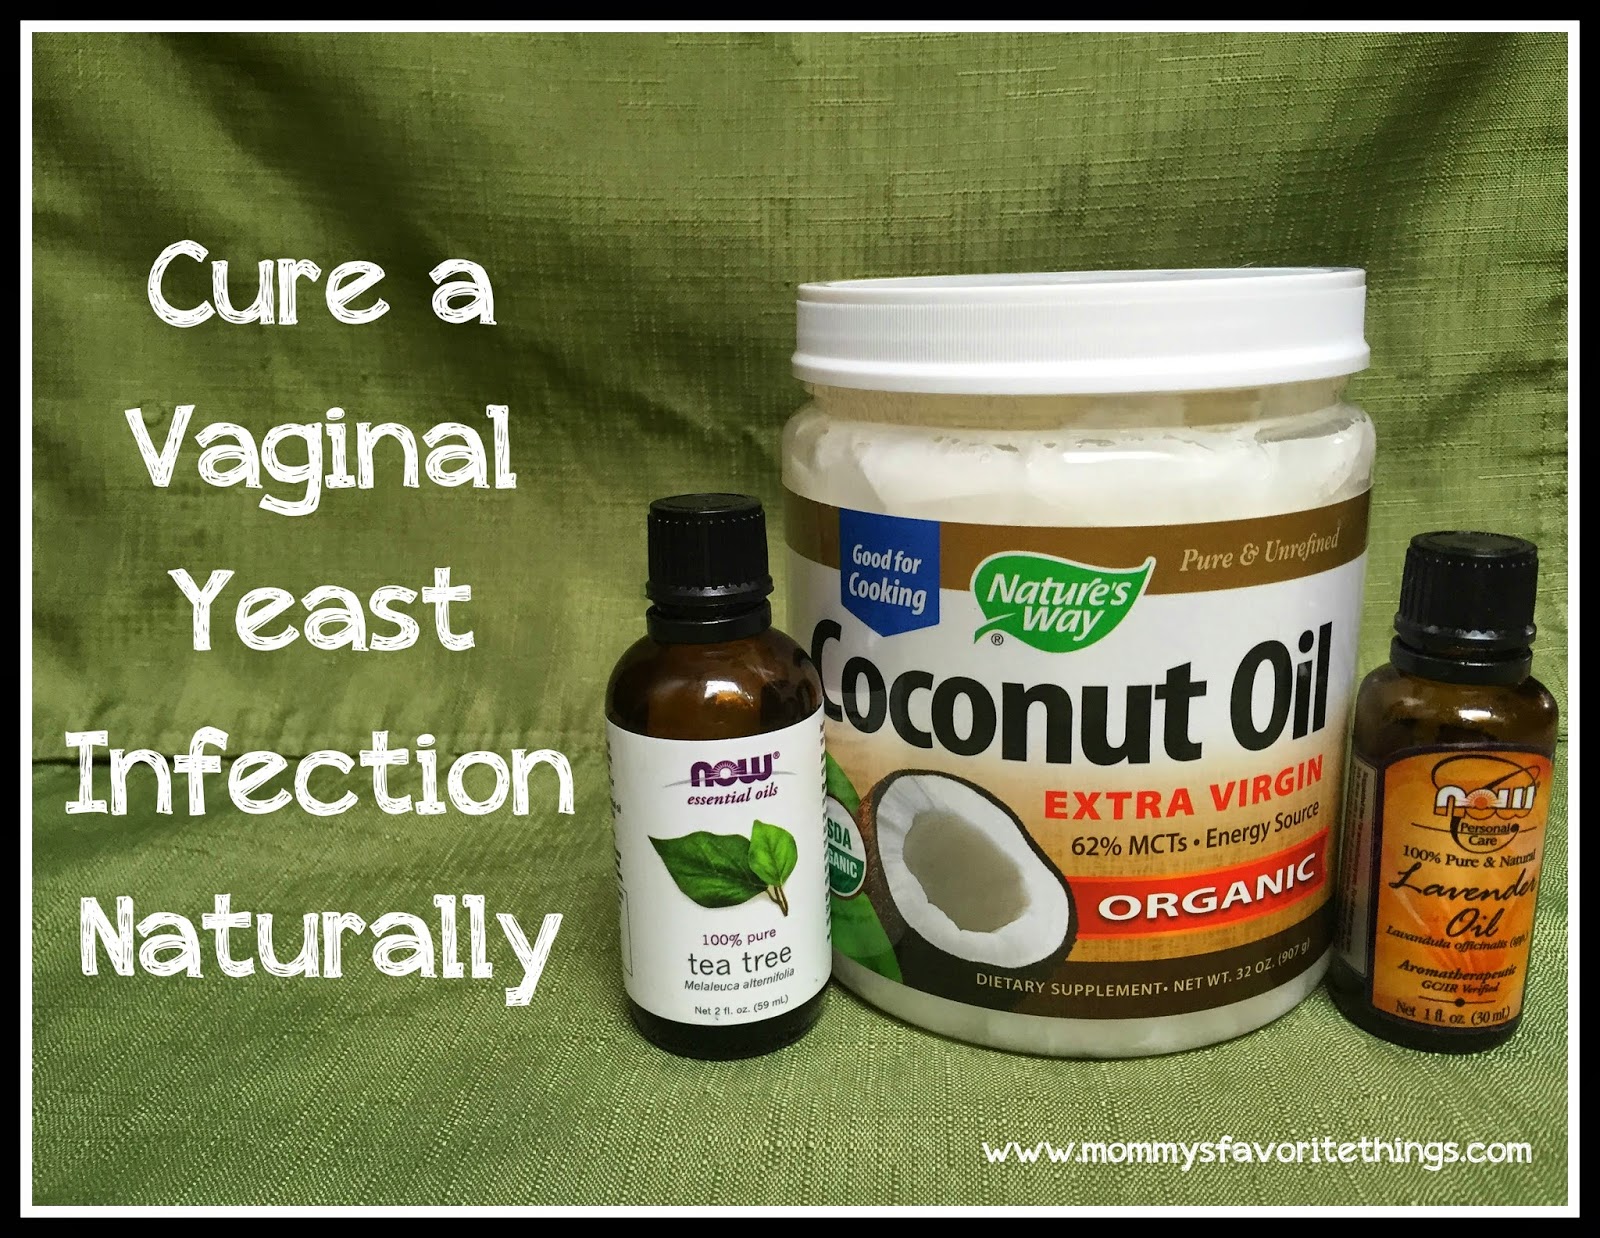 Mommys Favorite Things Cure A Vaginal Yeast Infection Naturally